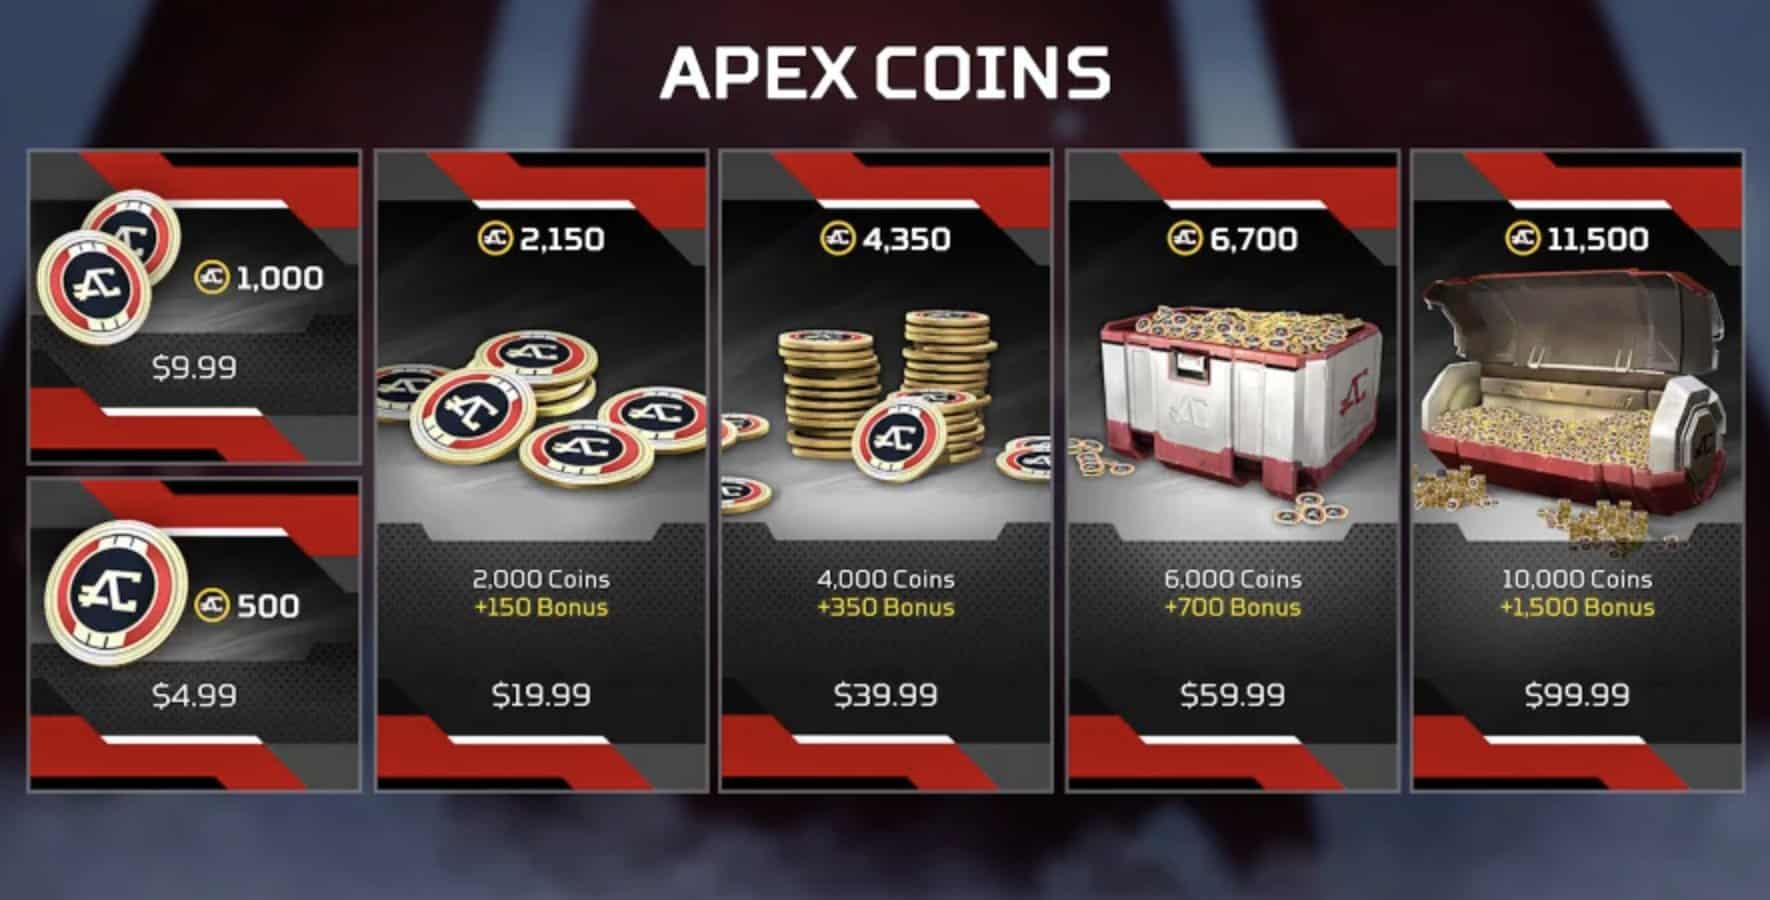 Apex Legends Coin pack options